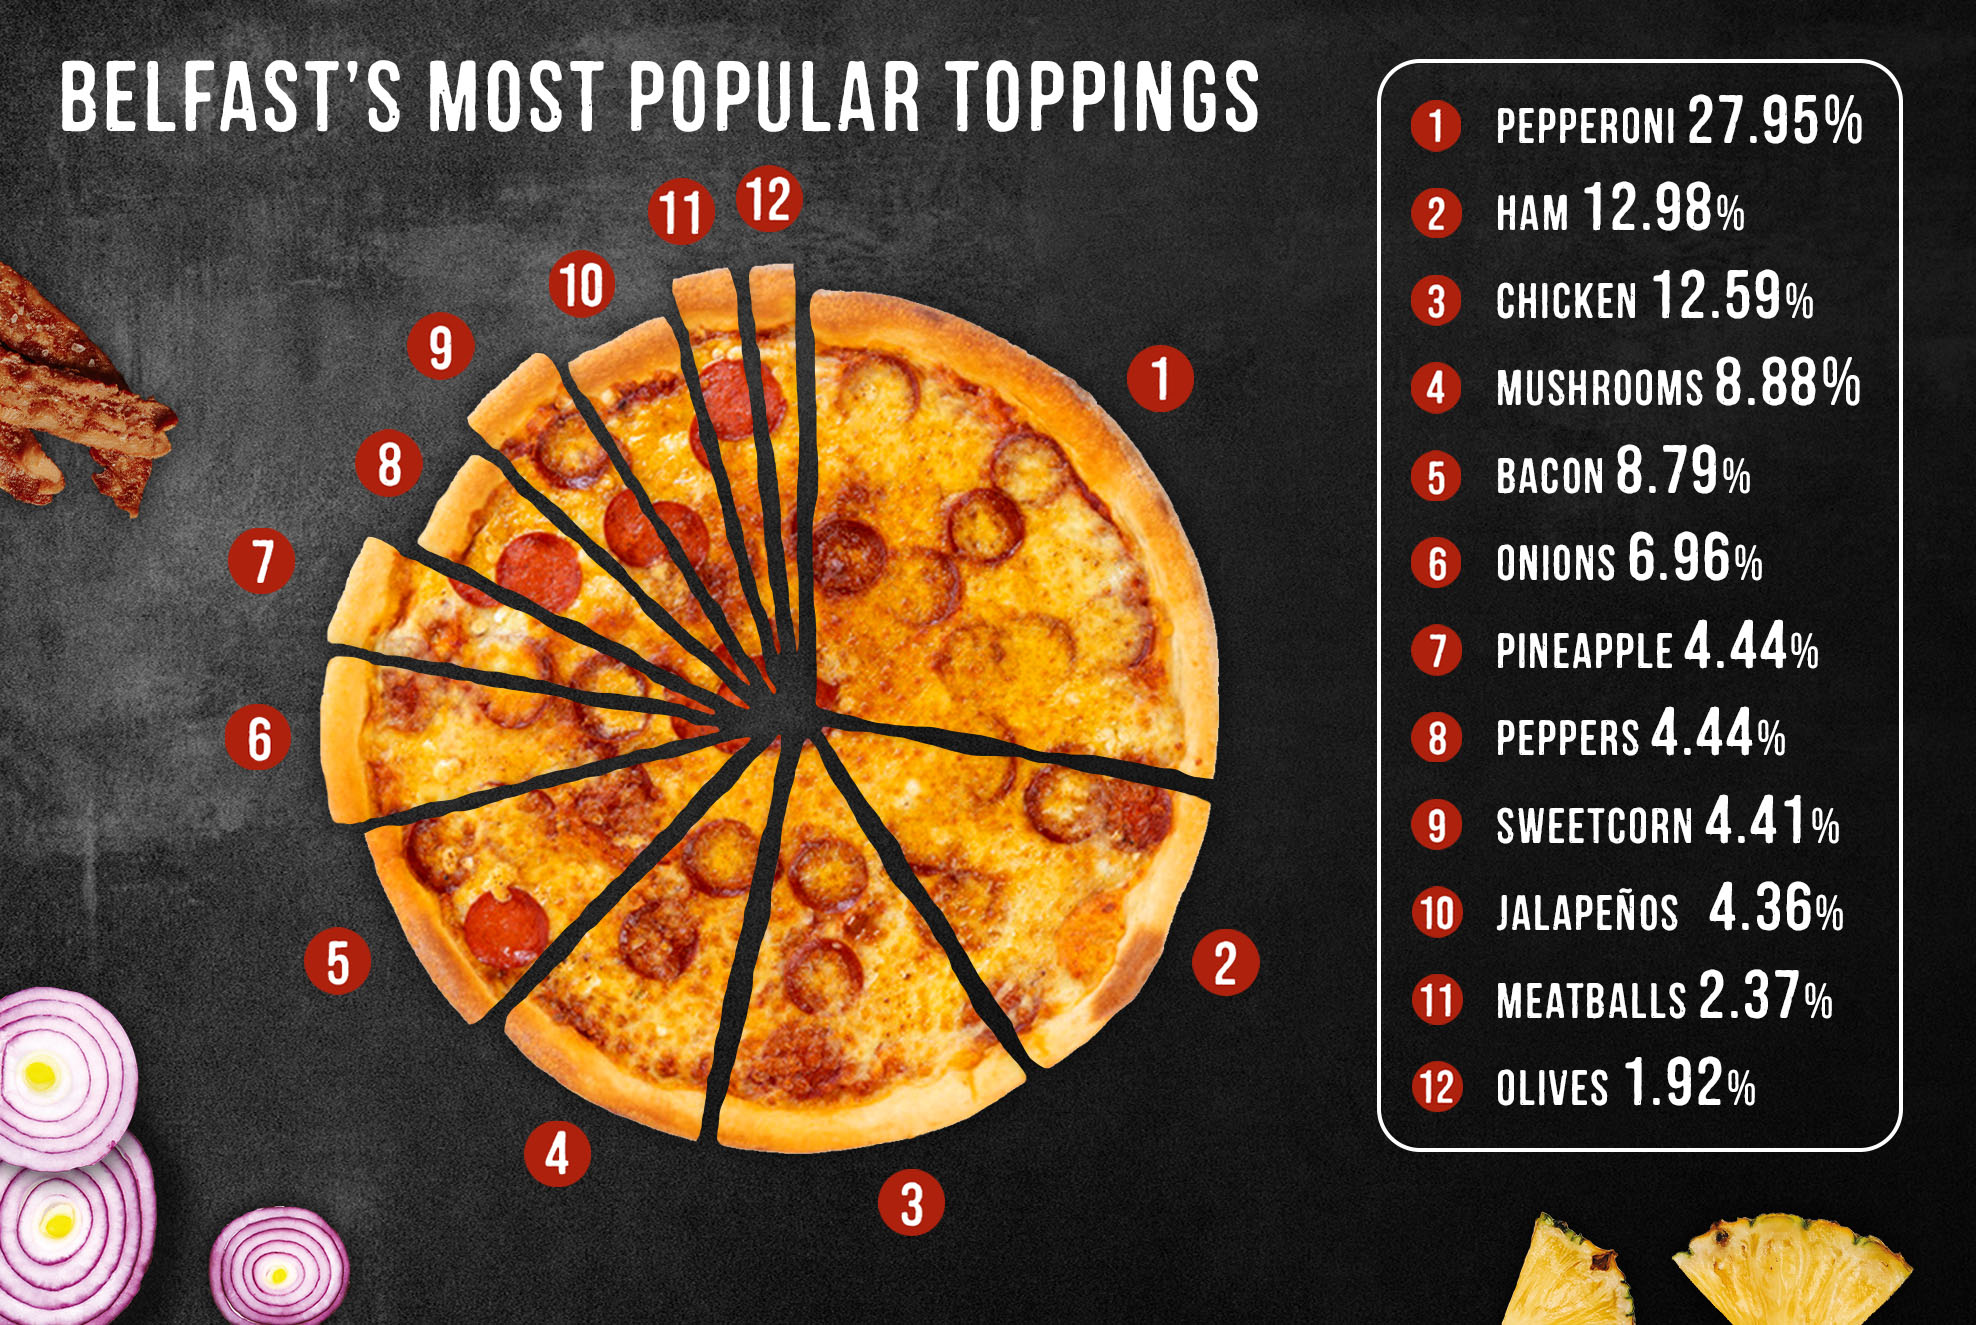 No Love for Olives on Pizza – NI Pizza Lovers less fussed on olives and pineapple